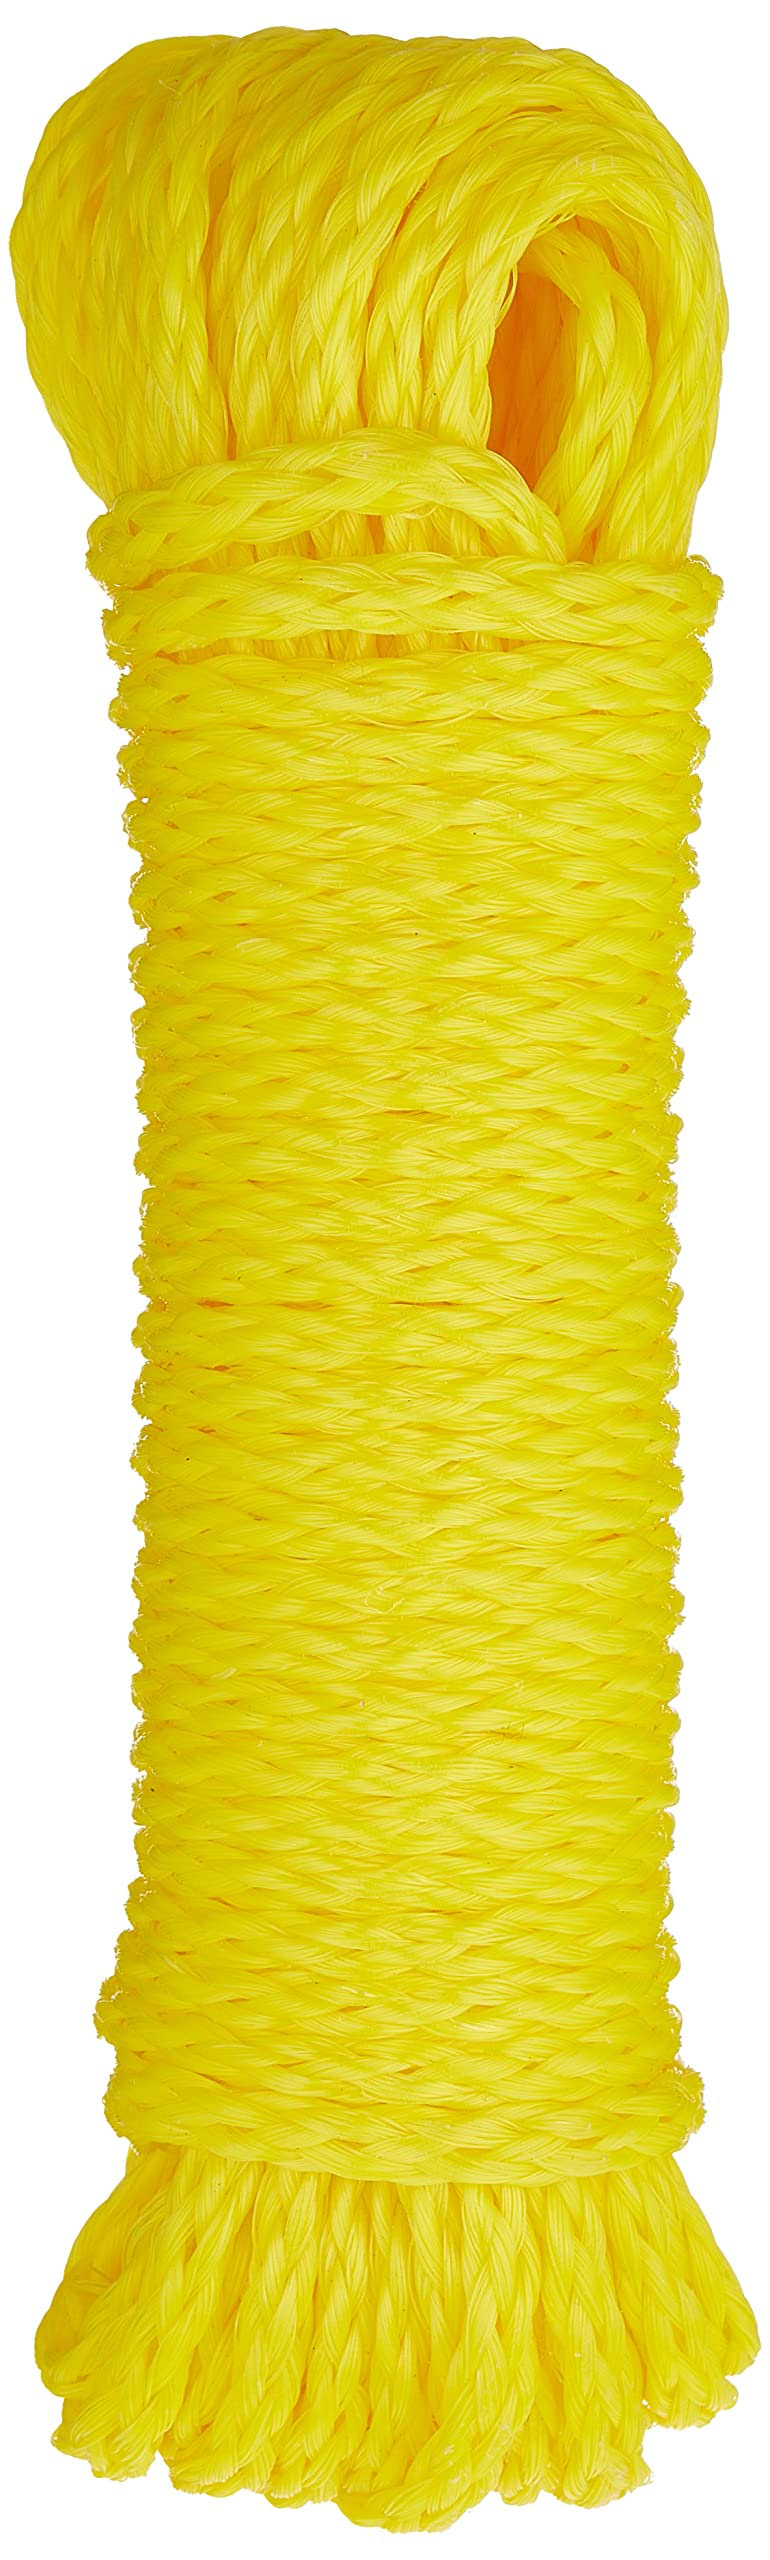 Polypropylene Rope, Hollow Core, Yellow, 1/4-In. x 50-Ft. -643641